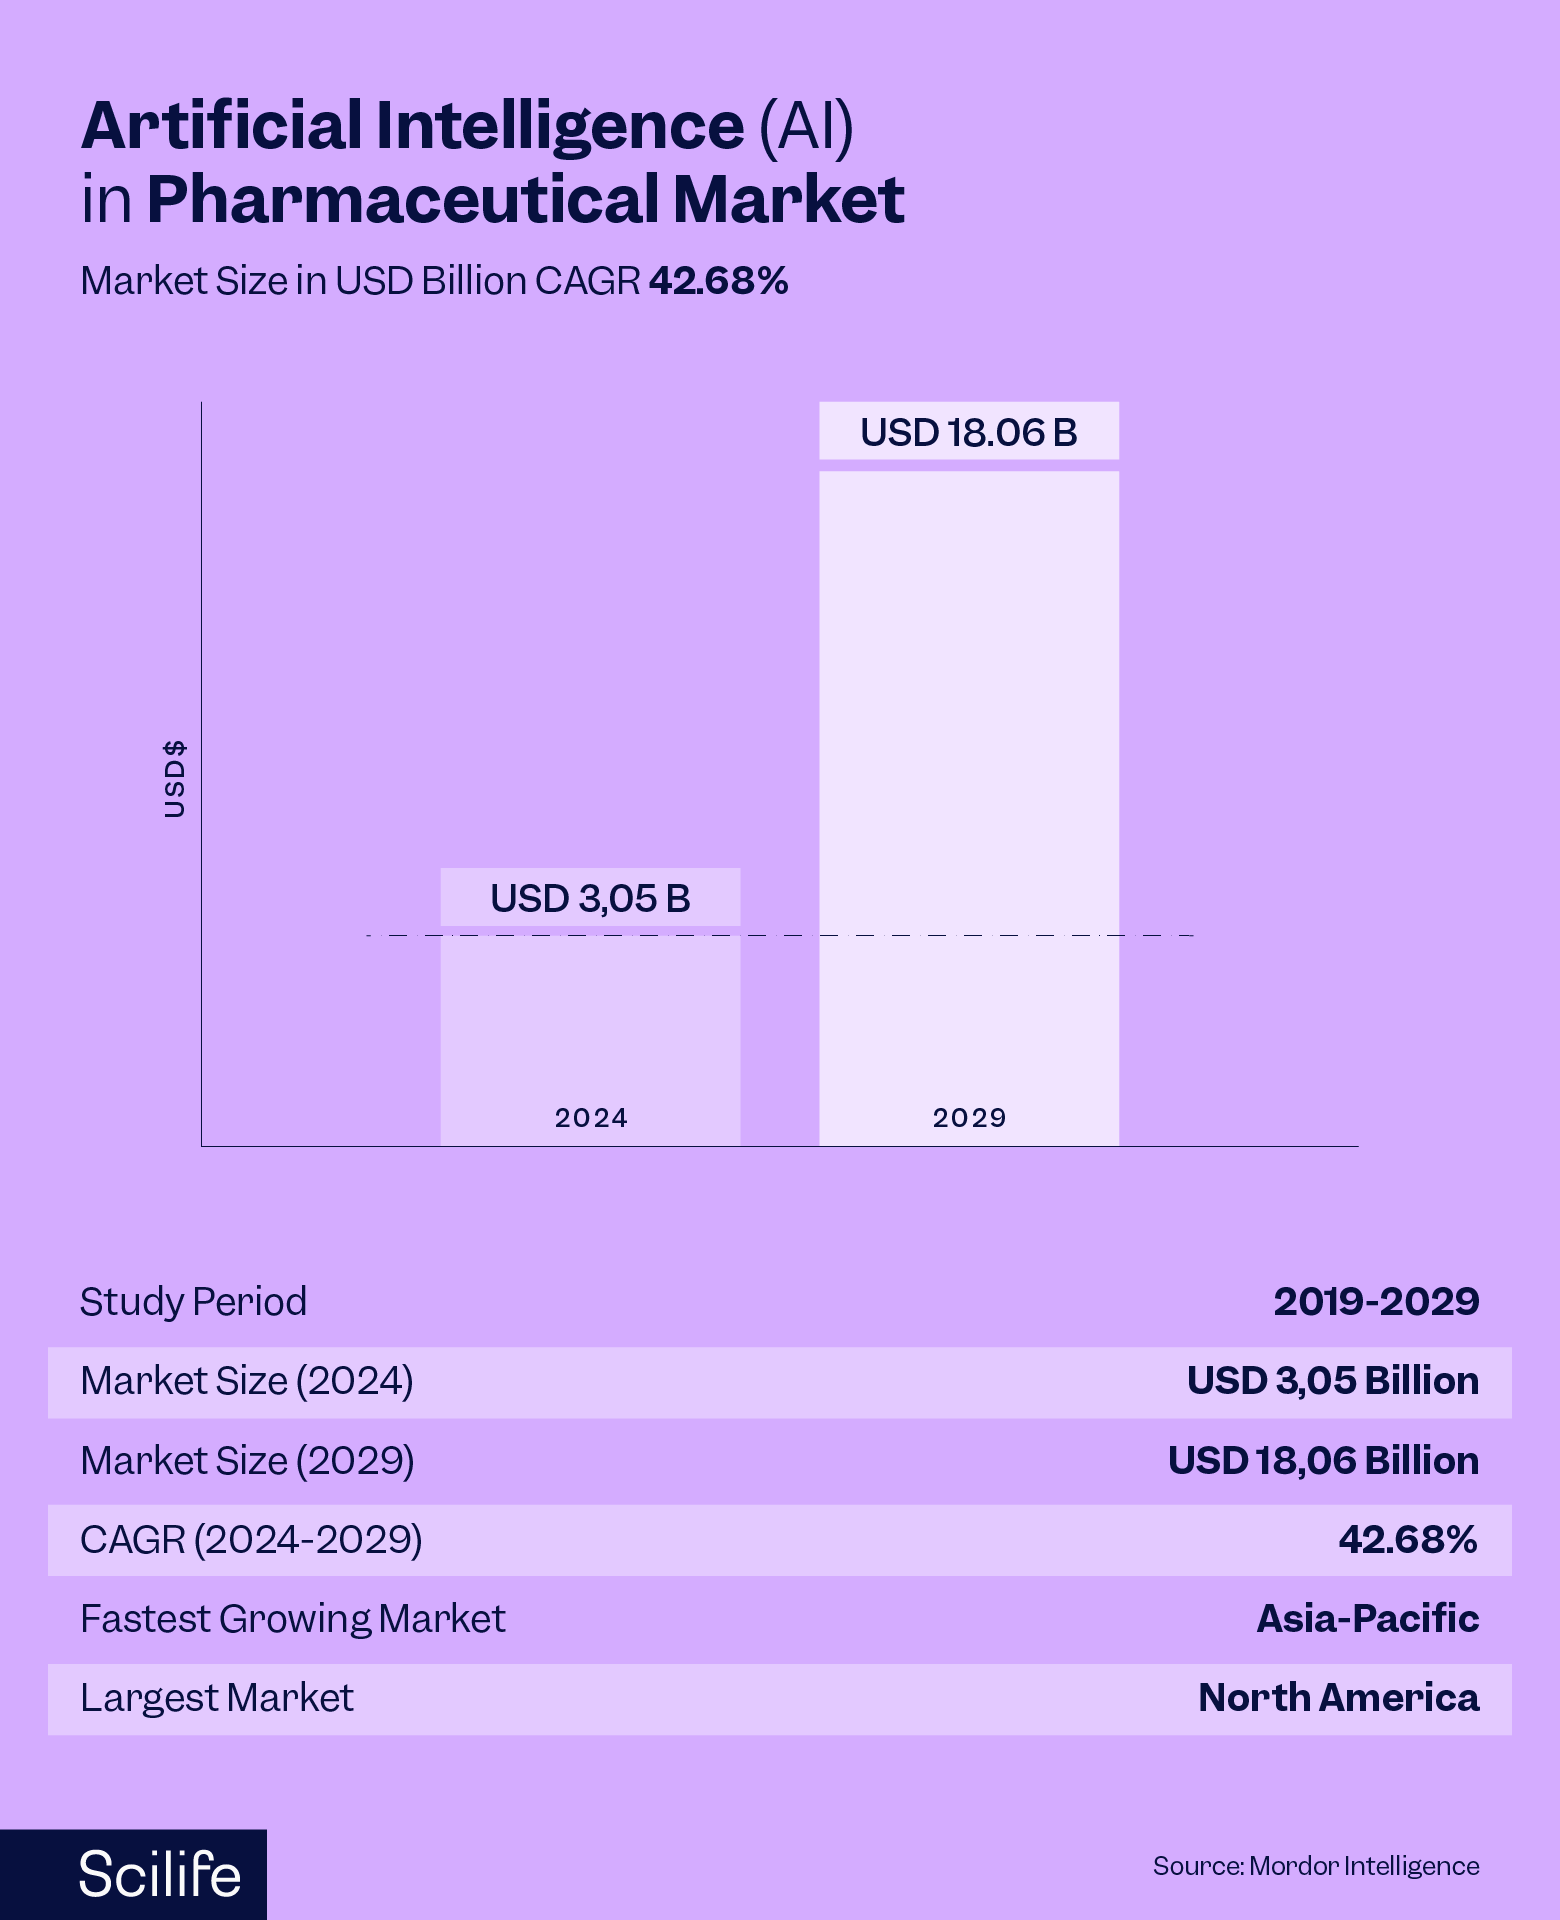 Graph that shows the Marketing Size of Artificial Intelligence in the Pharmaceutical Market | Scilife